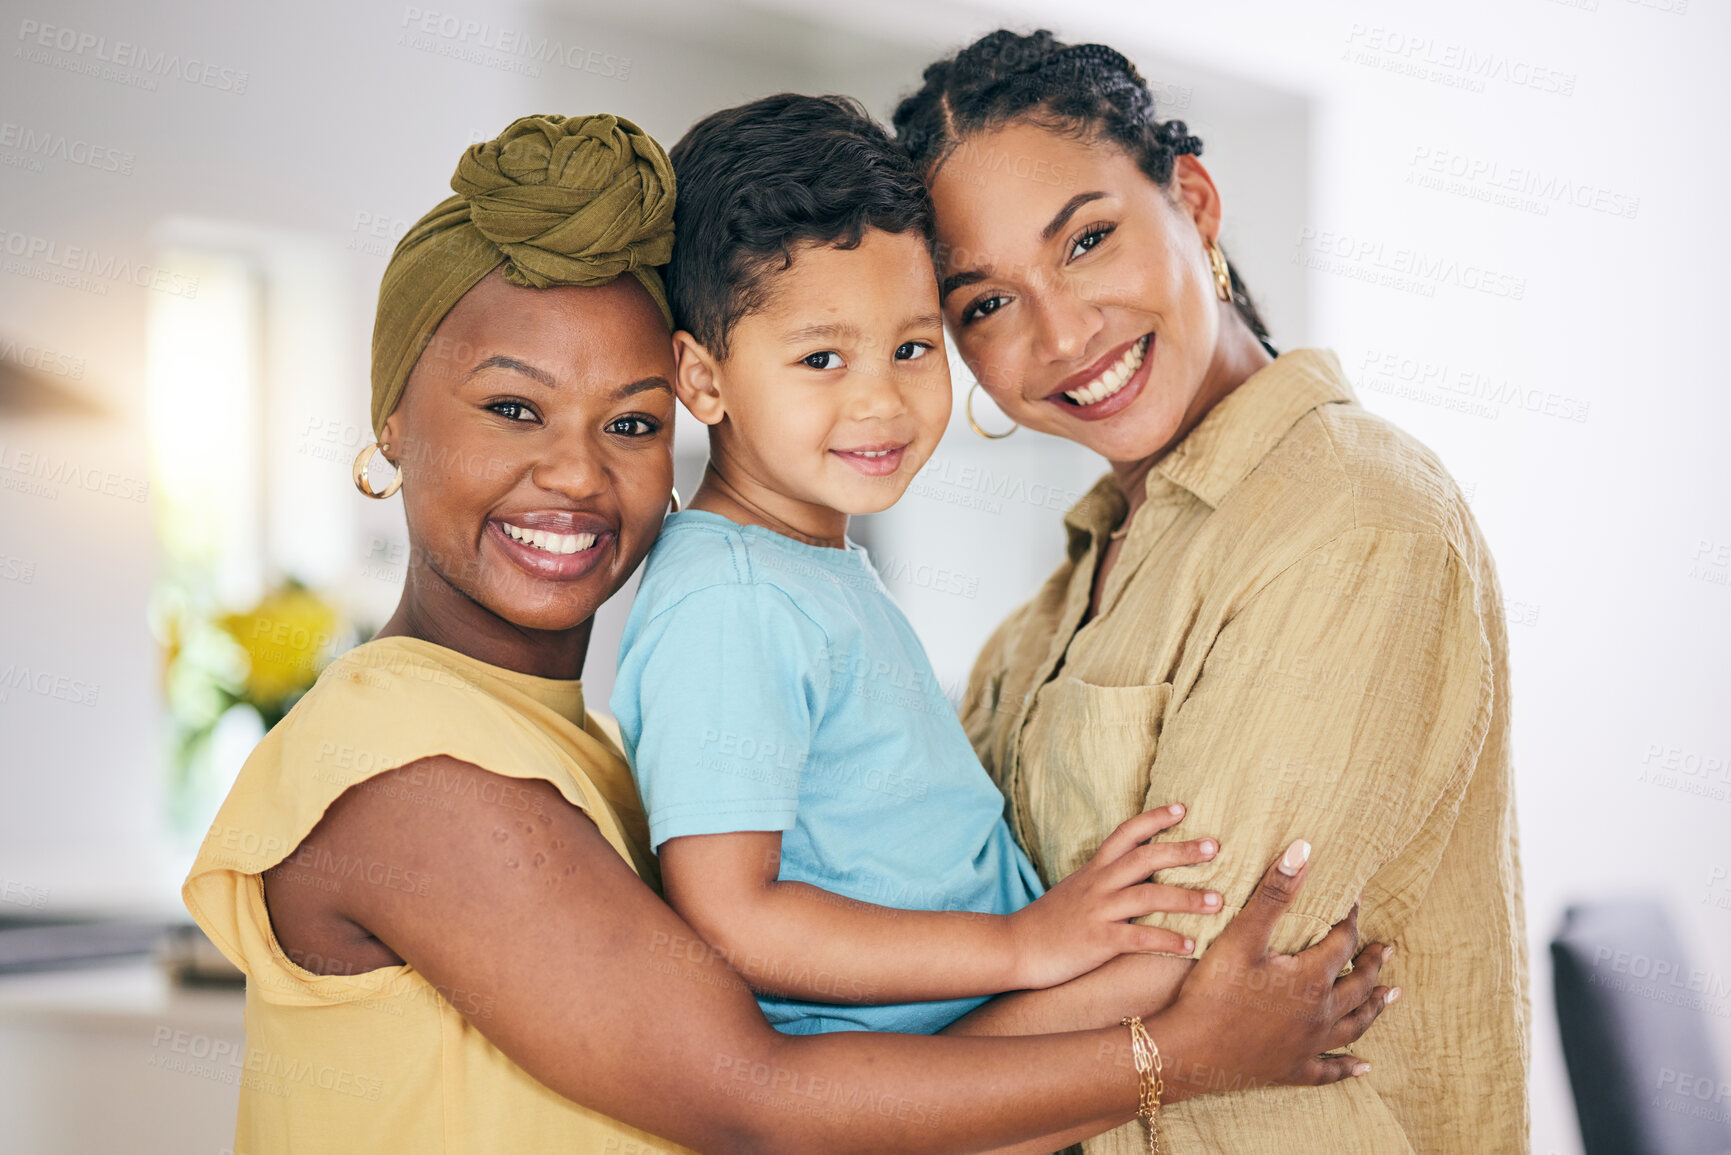 Buy stock photo LGBT, child hug or portrait of happy family, non binary mama or transgender mom bonding, smile and care for young son. Lesbian love, home and face of gay people, mothers or women embrace adoption kid